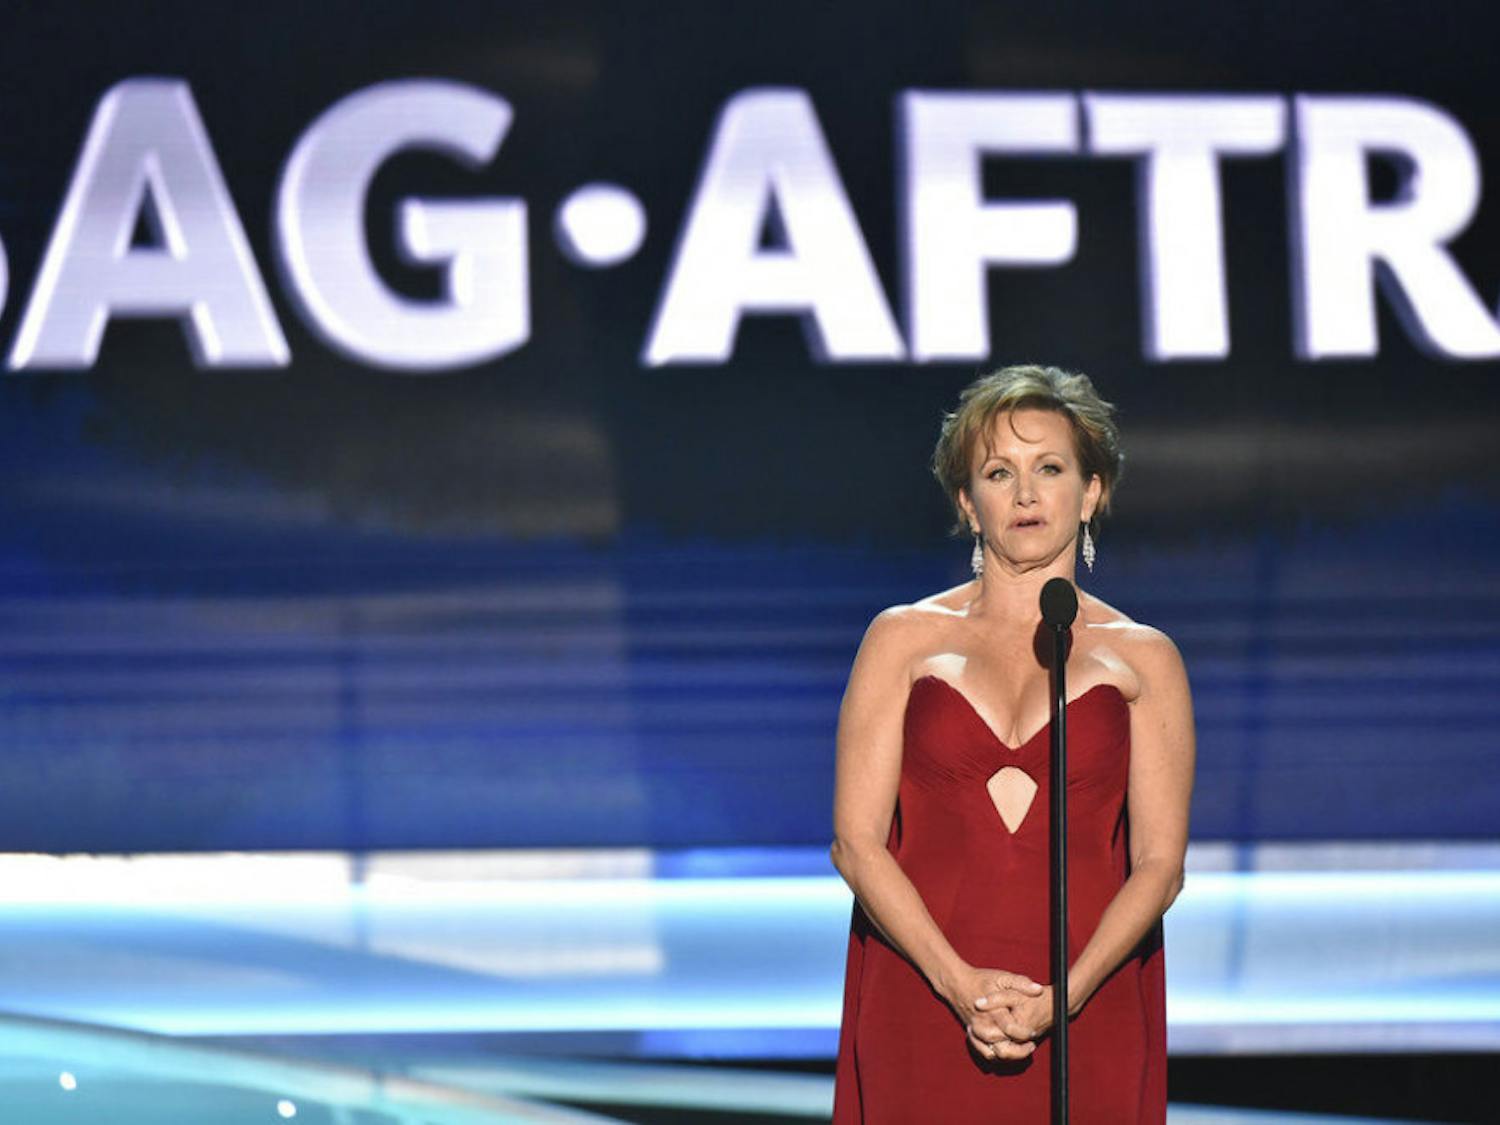 SAG-AFTRA President Gabrielle Carteris speaks at the 24th annual Screen Actors Guild Awards at the Shrine Auditorium &amp; Expo Hall on Sunday, Jan. 21, 2018, in Los Angeles. (Photo by Vince Bucci/Invision/AP)